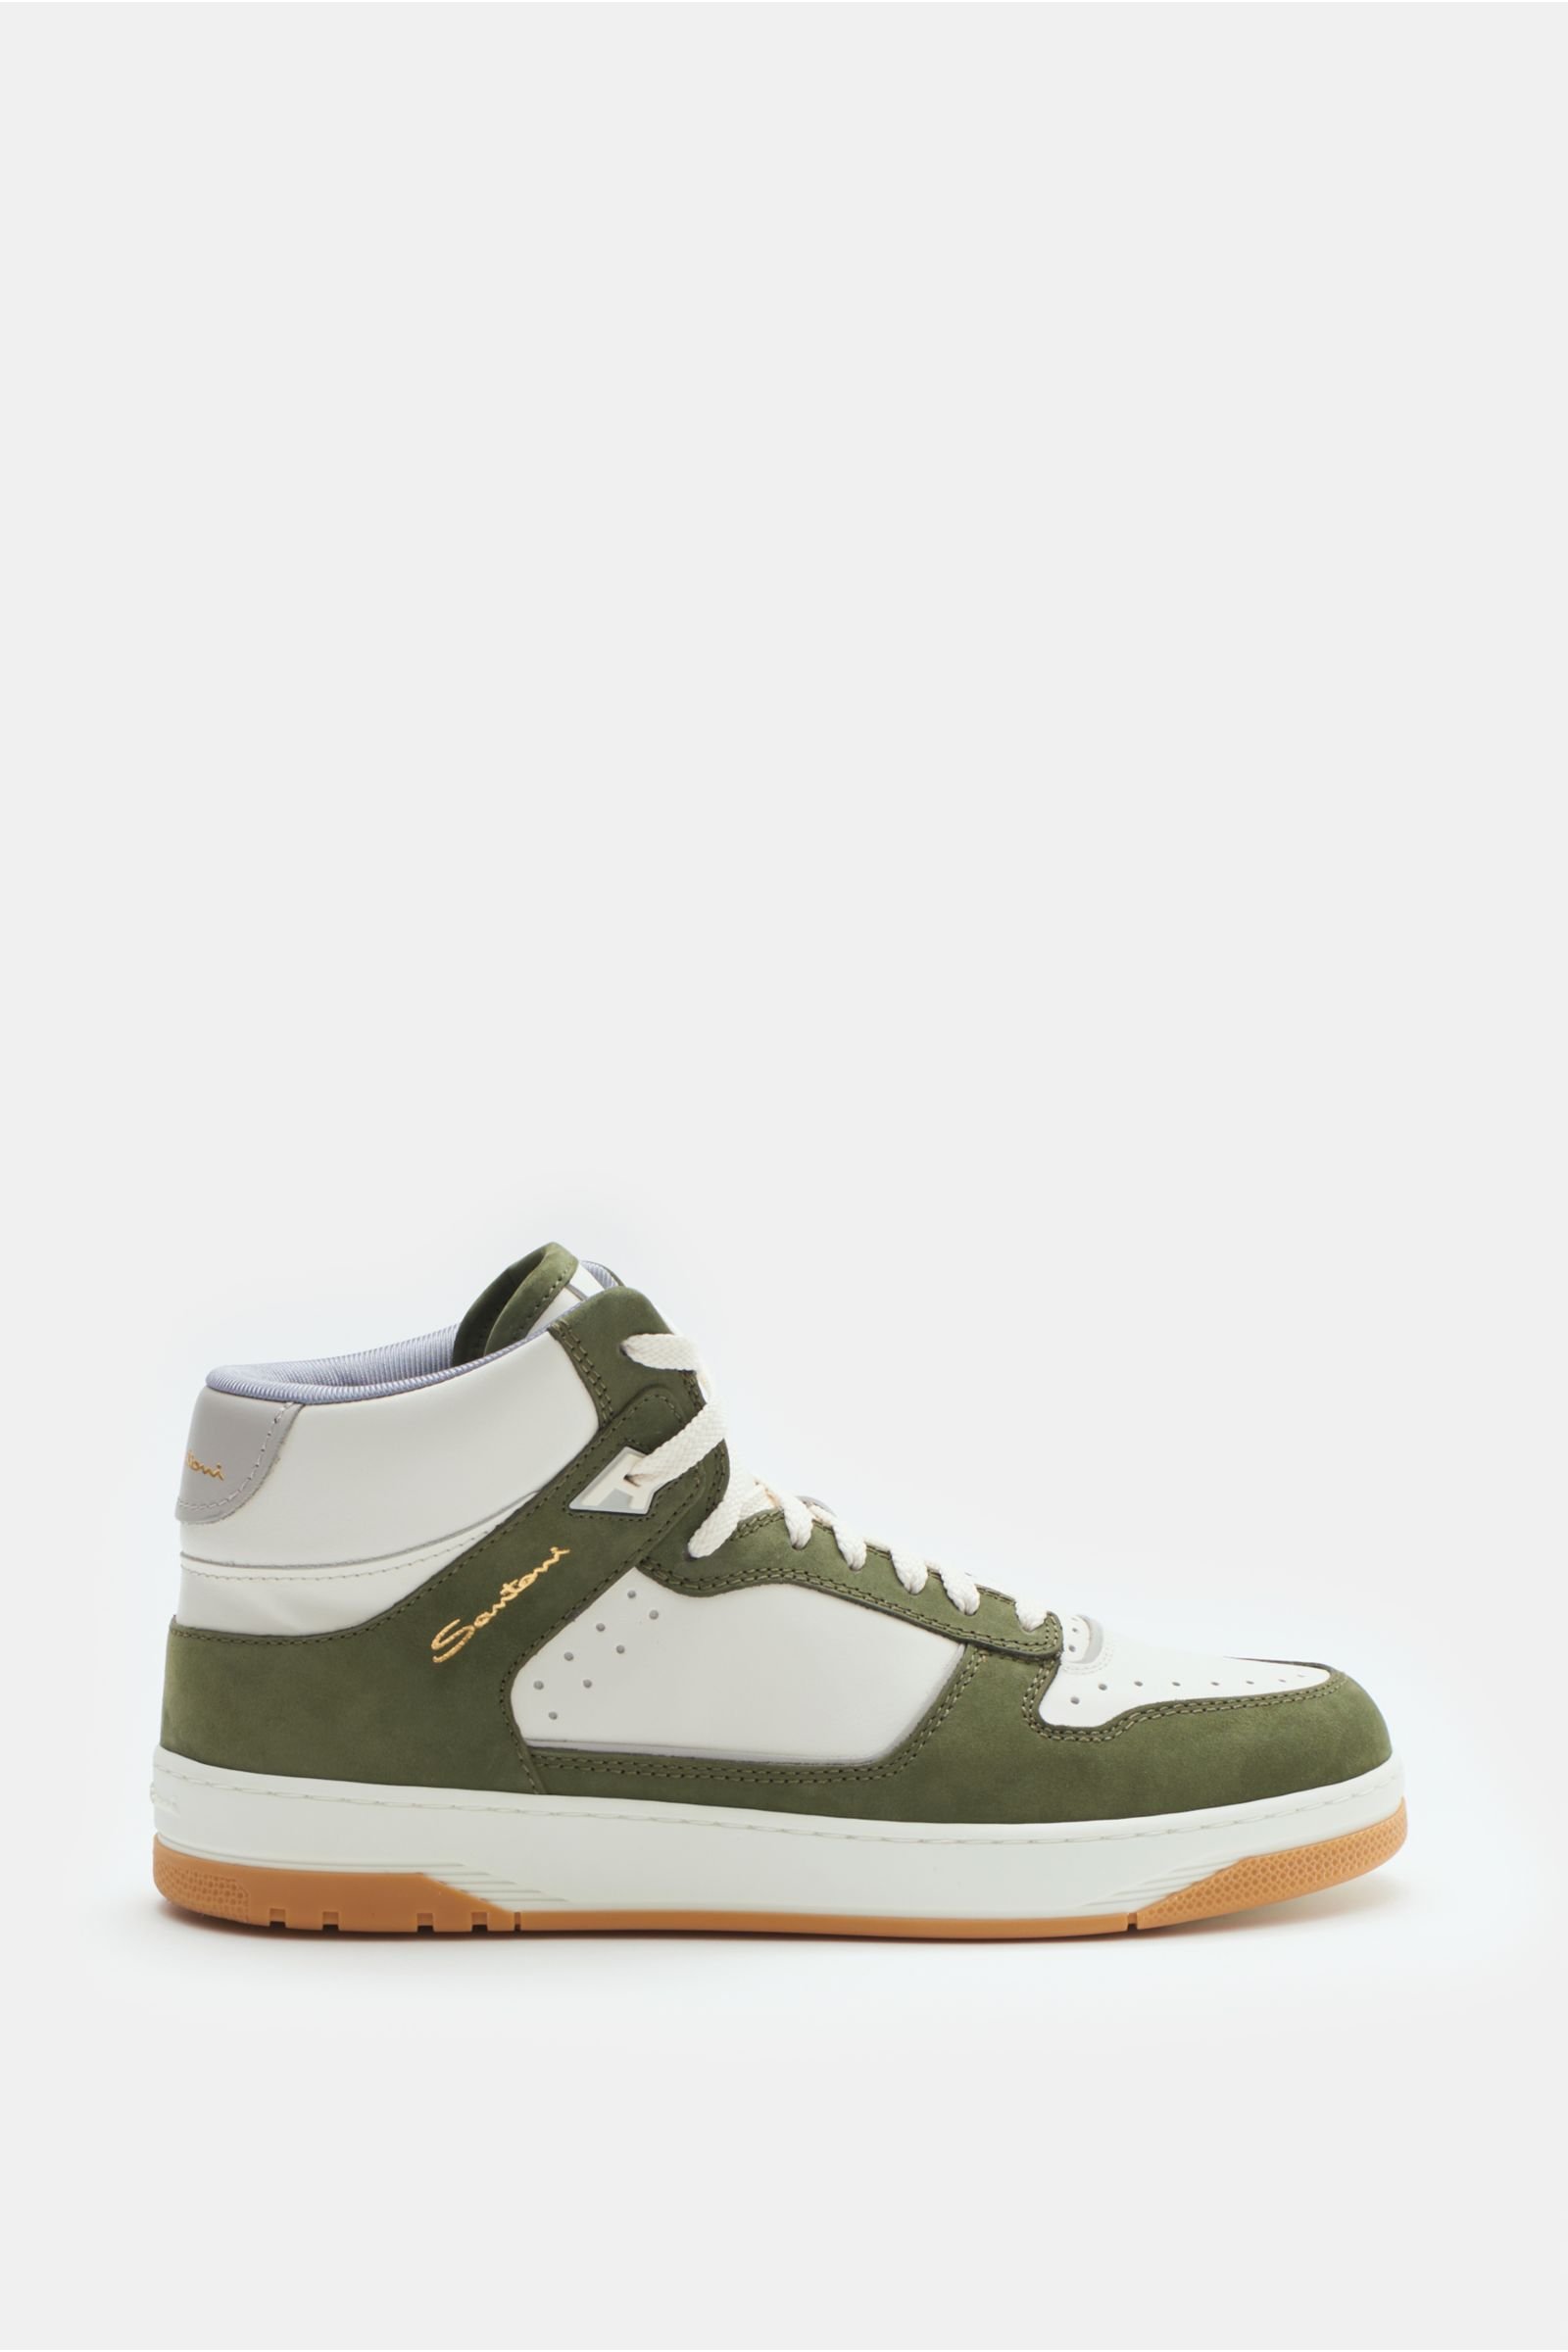 High top sneakers white/olive